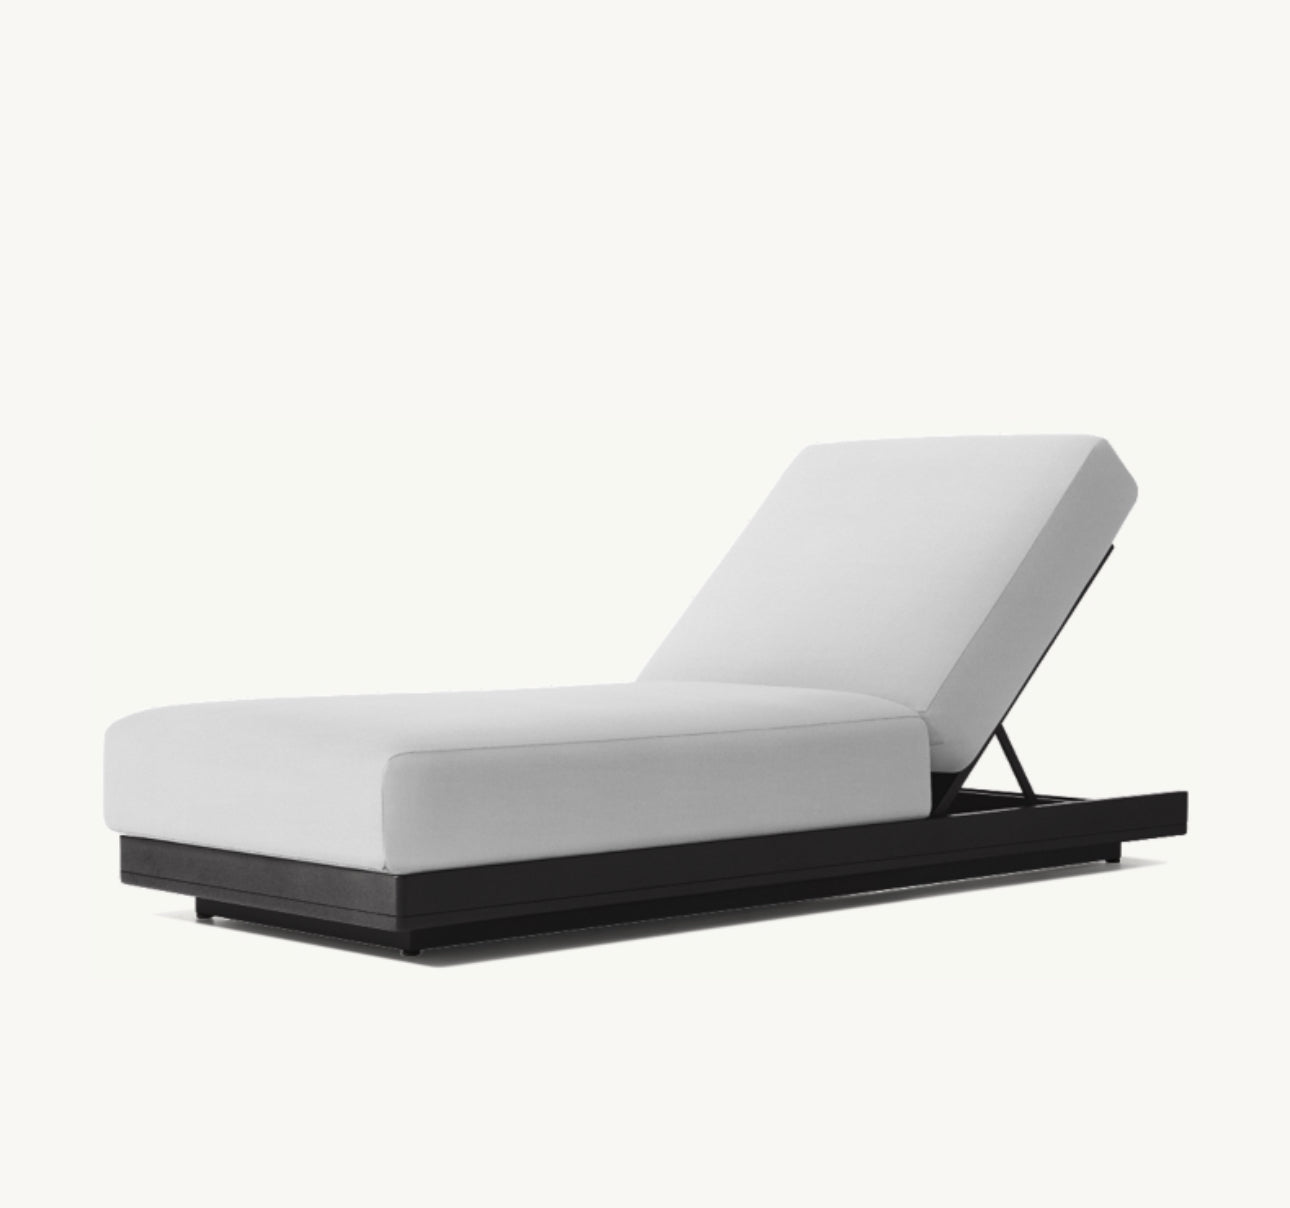 Ultra Modern “Rio” Outdoor Day Bed